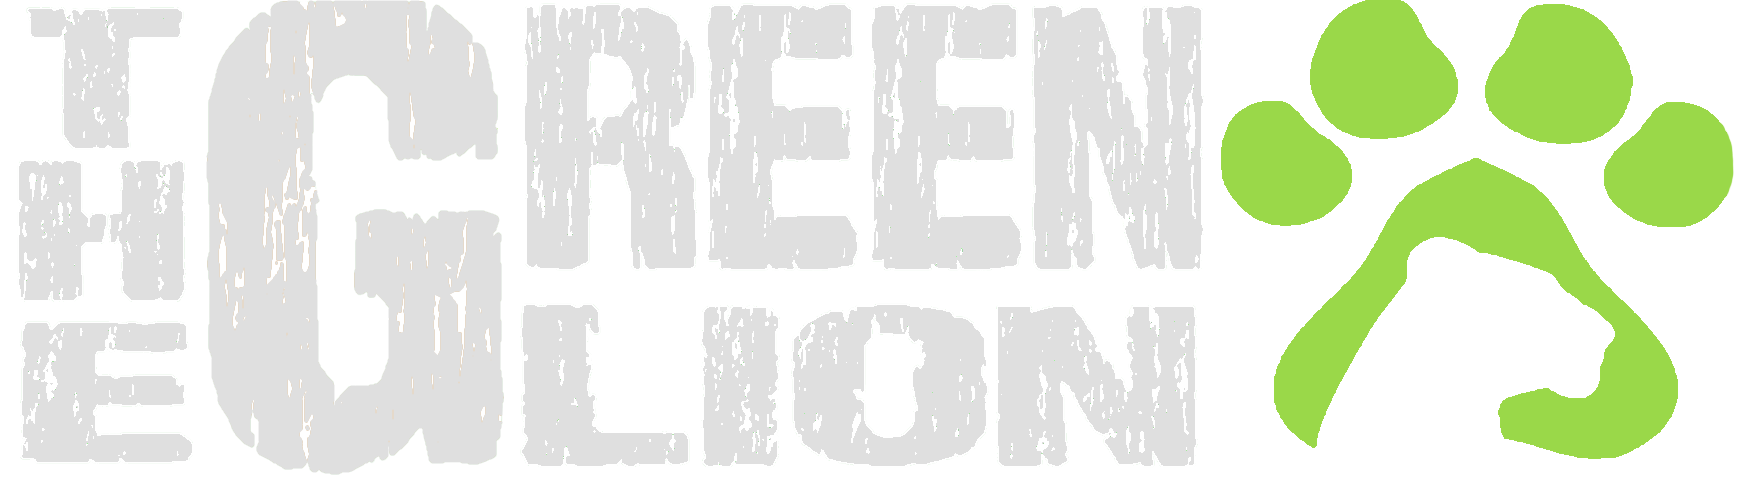 The Green Lion